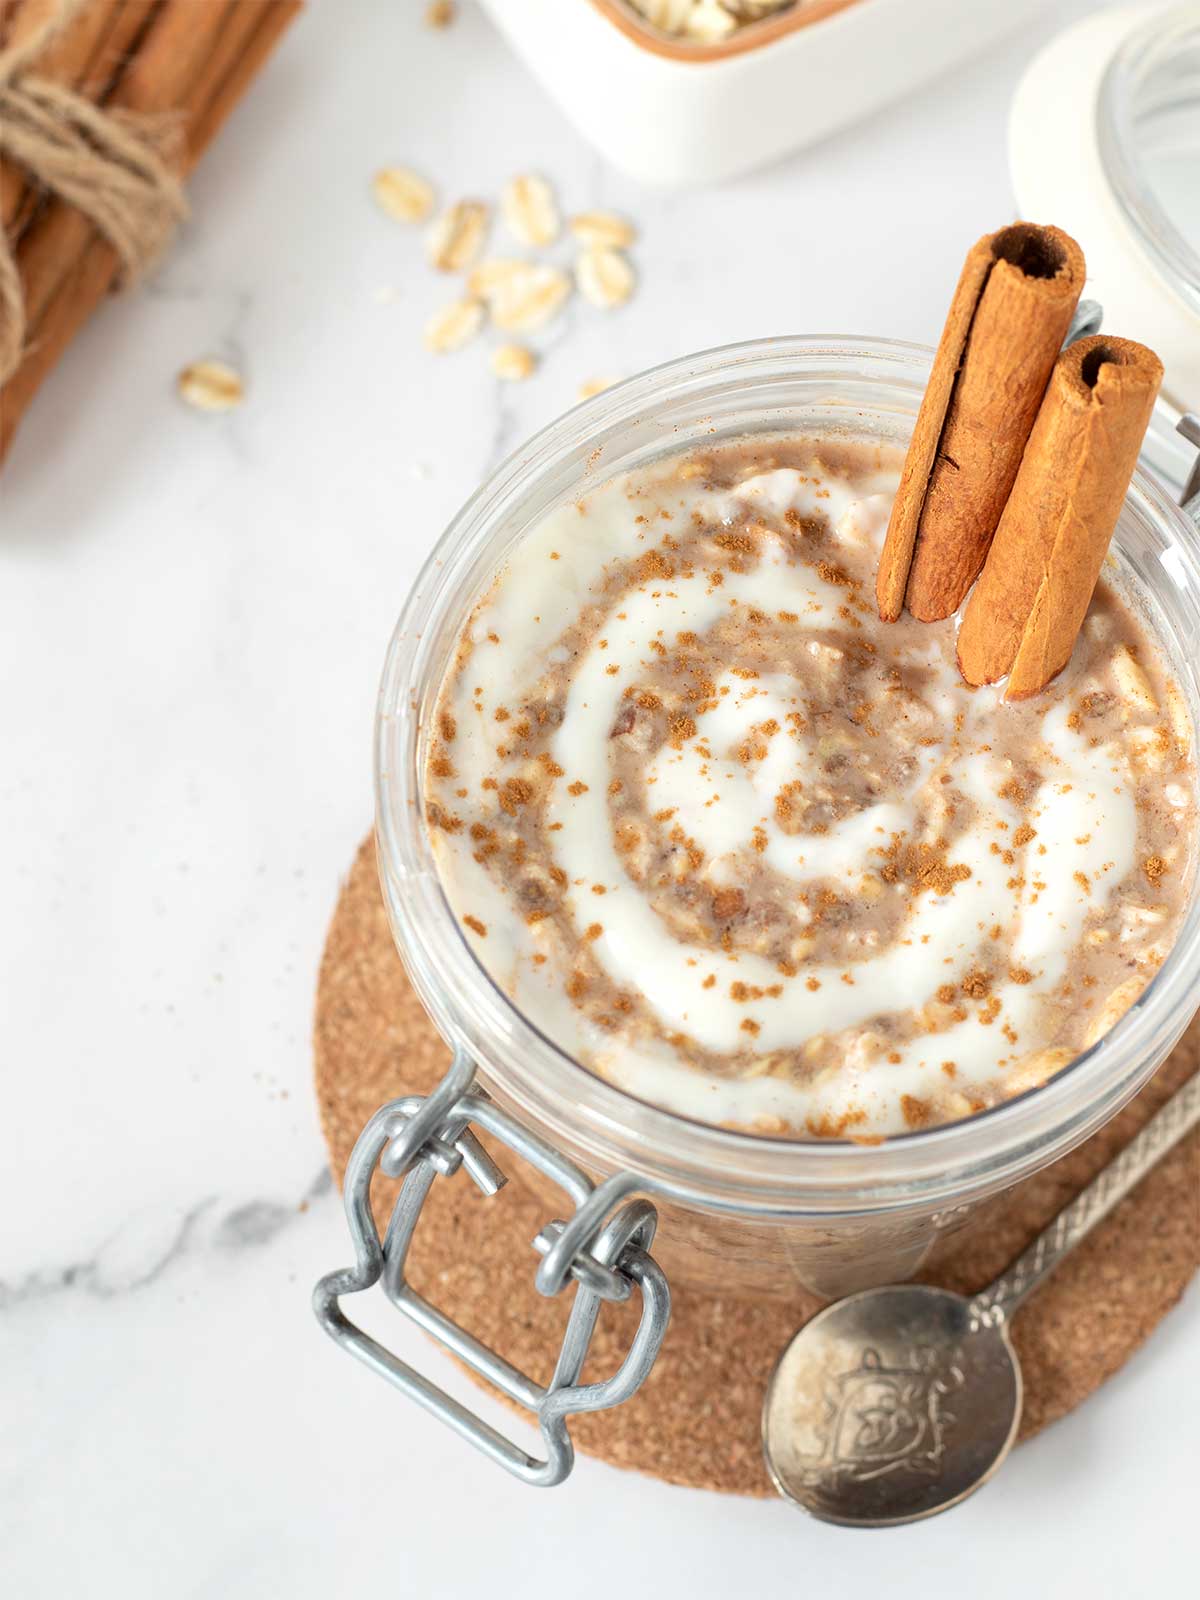 Cinnamon roll overnight oats with brown sugar, chia seeds, and almond milk with healthy protein icing.